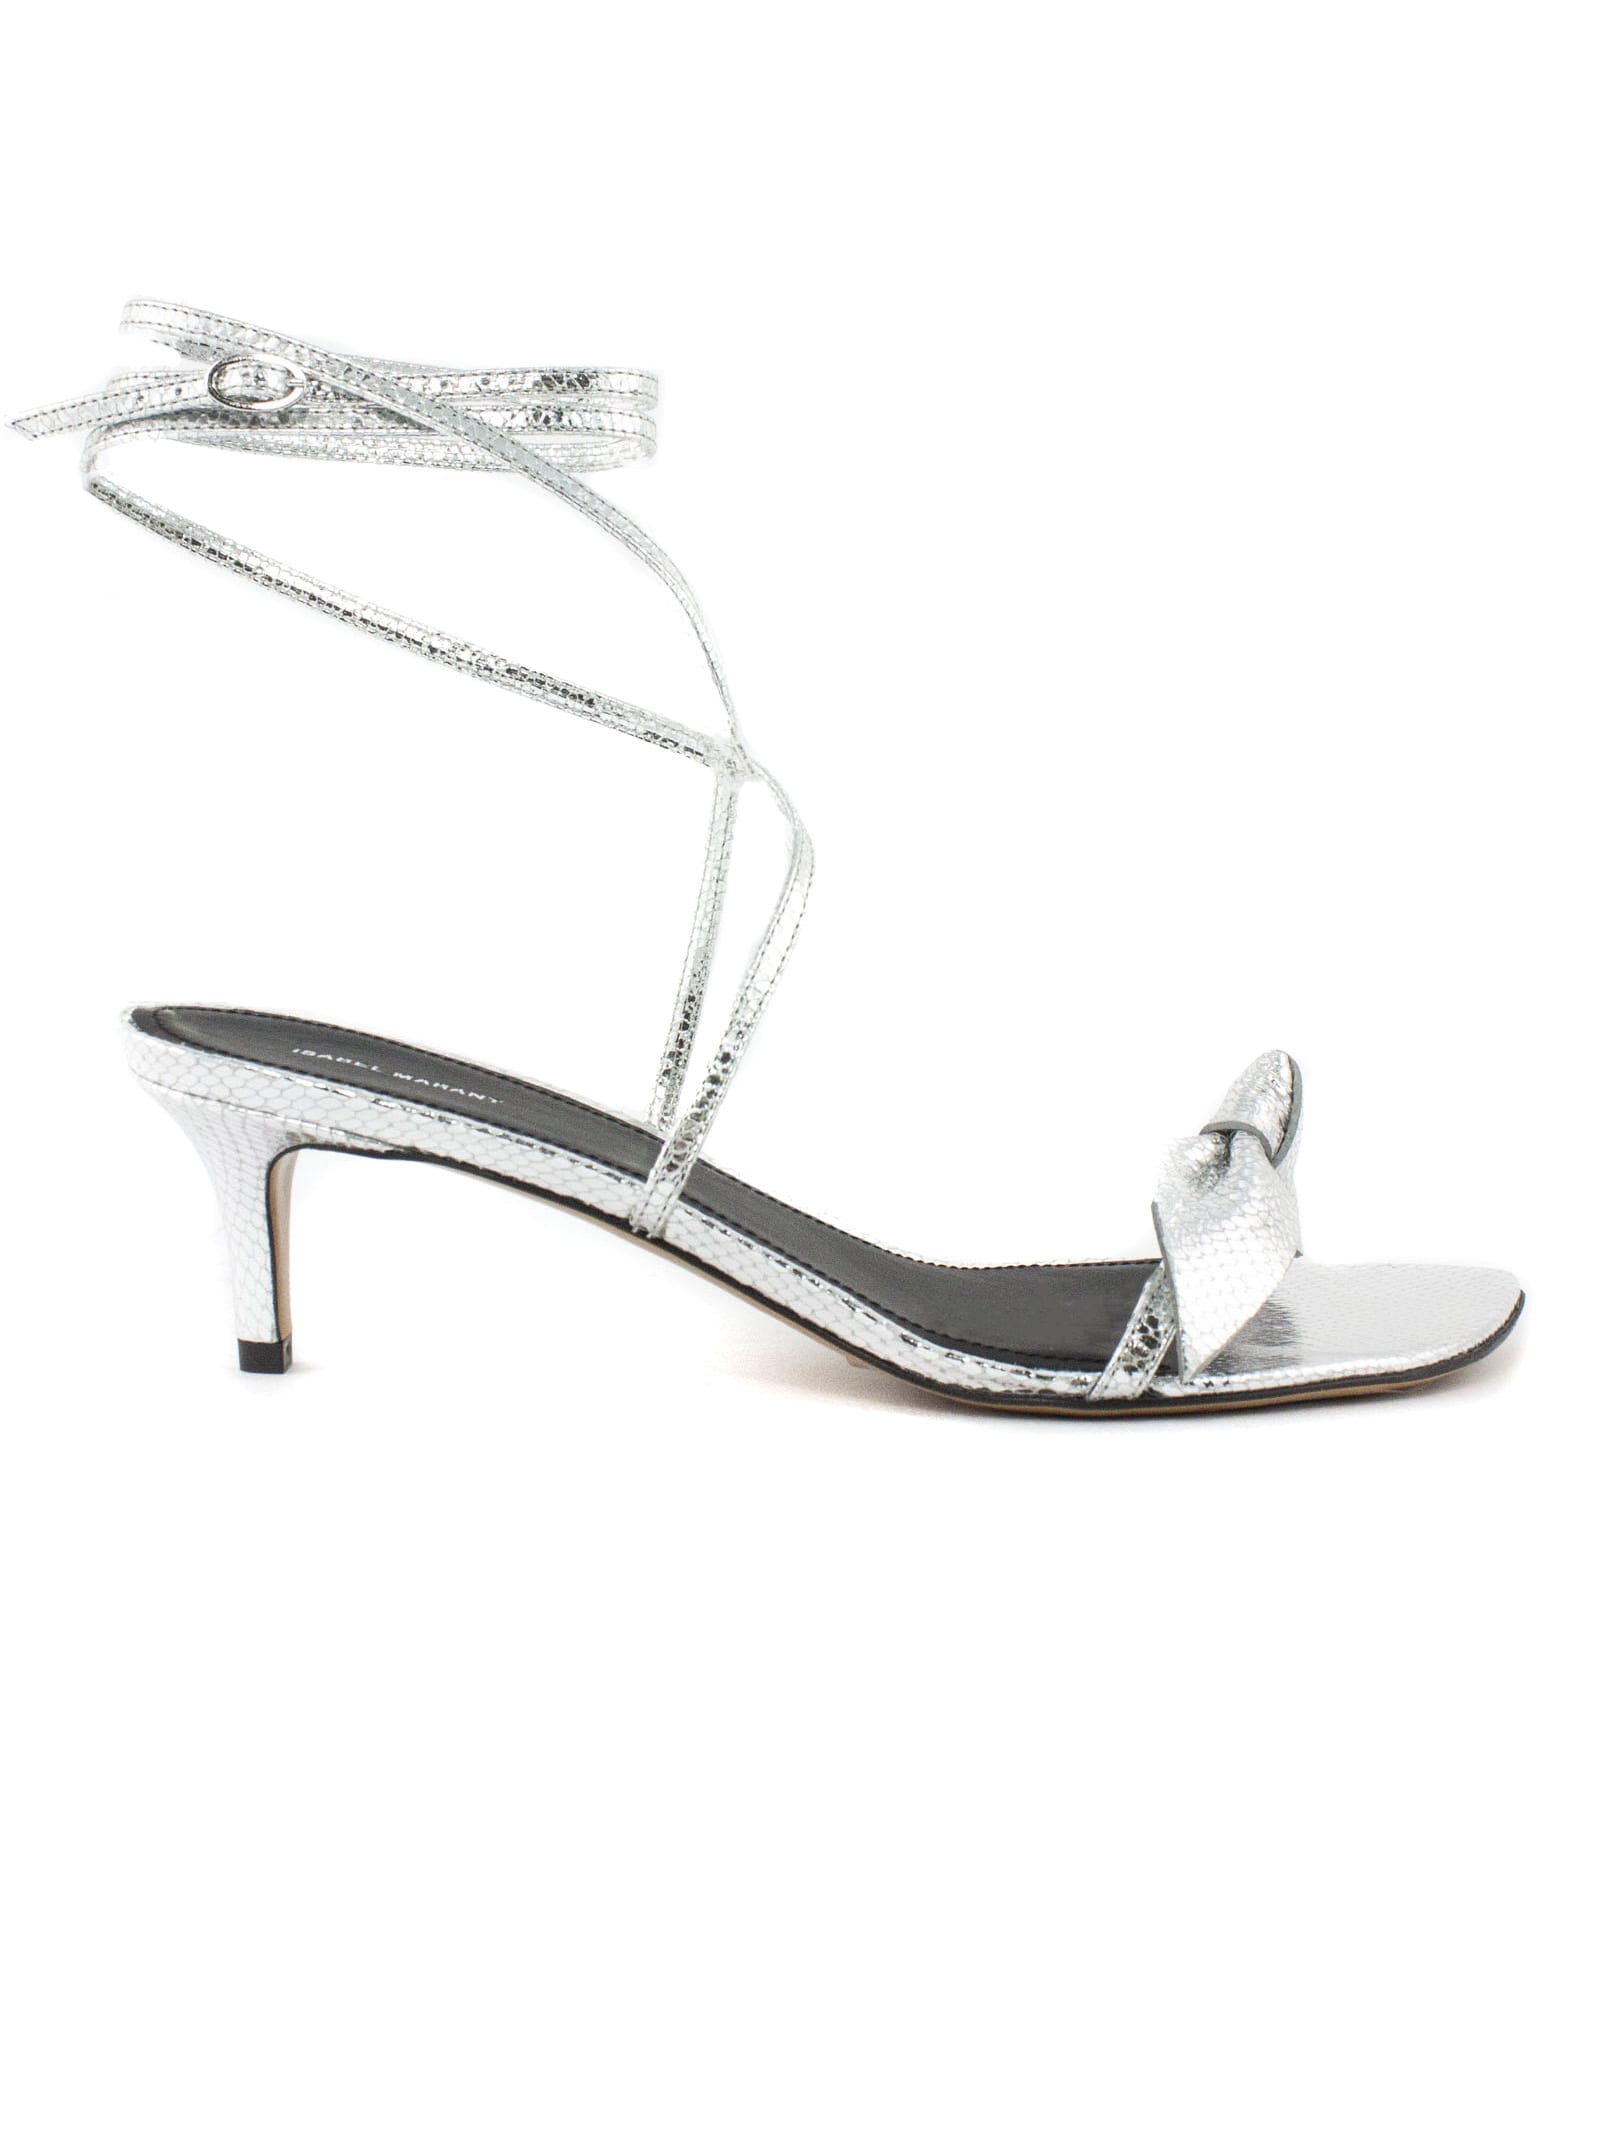 Isabel Marant Silver-tone Leather Sandals